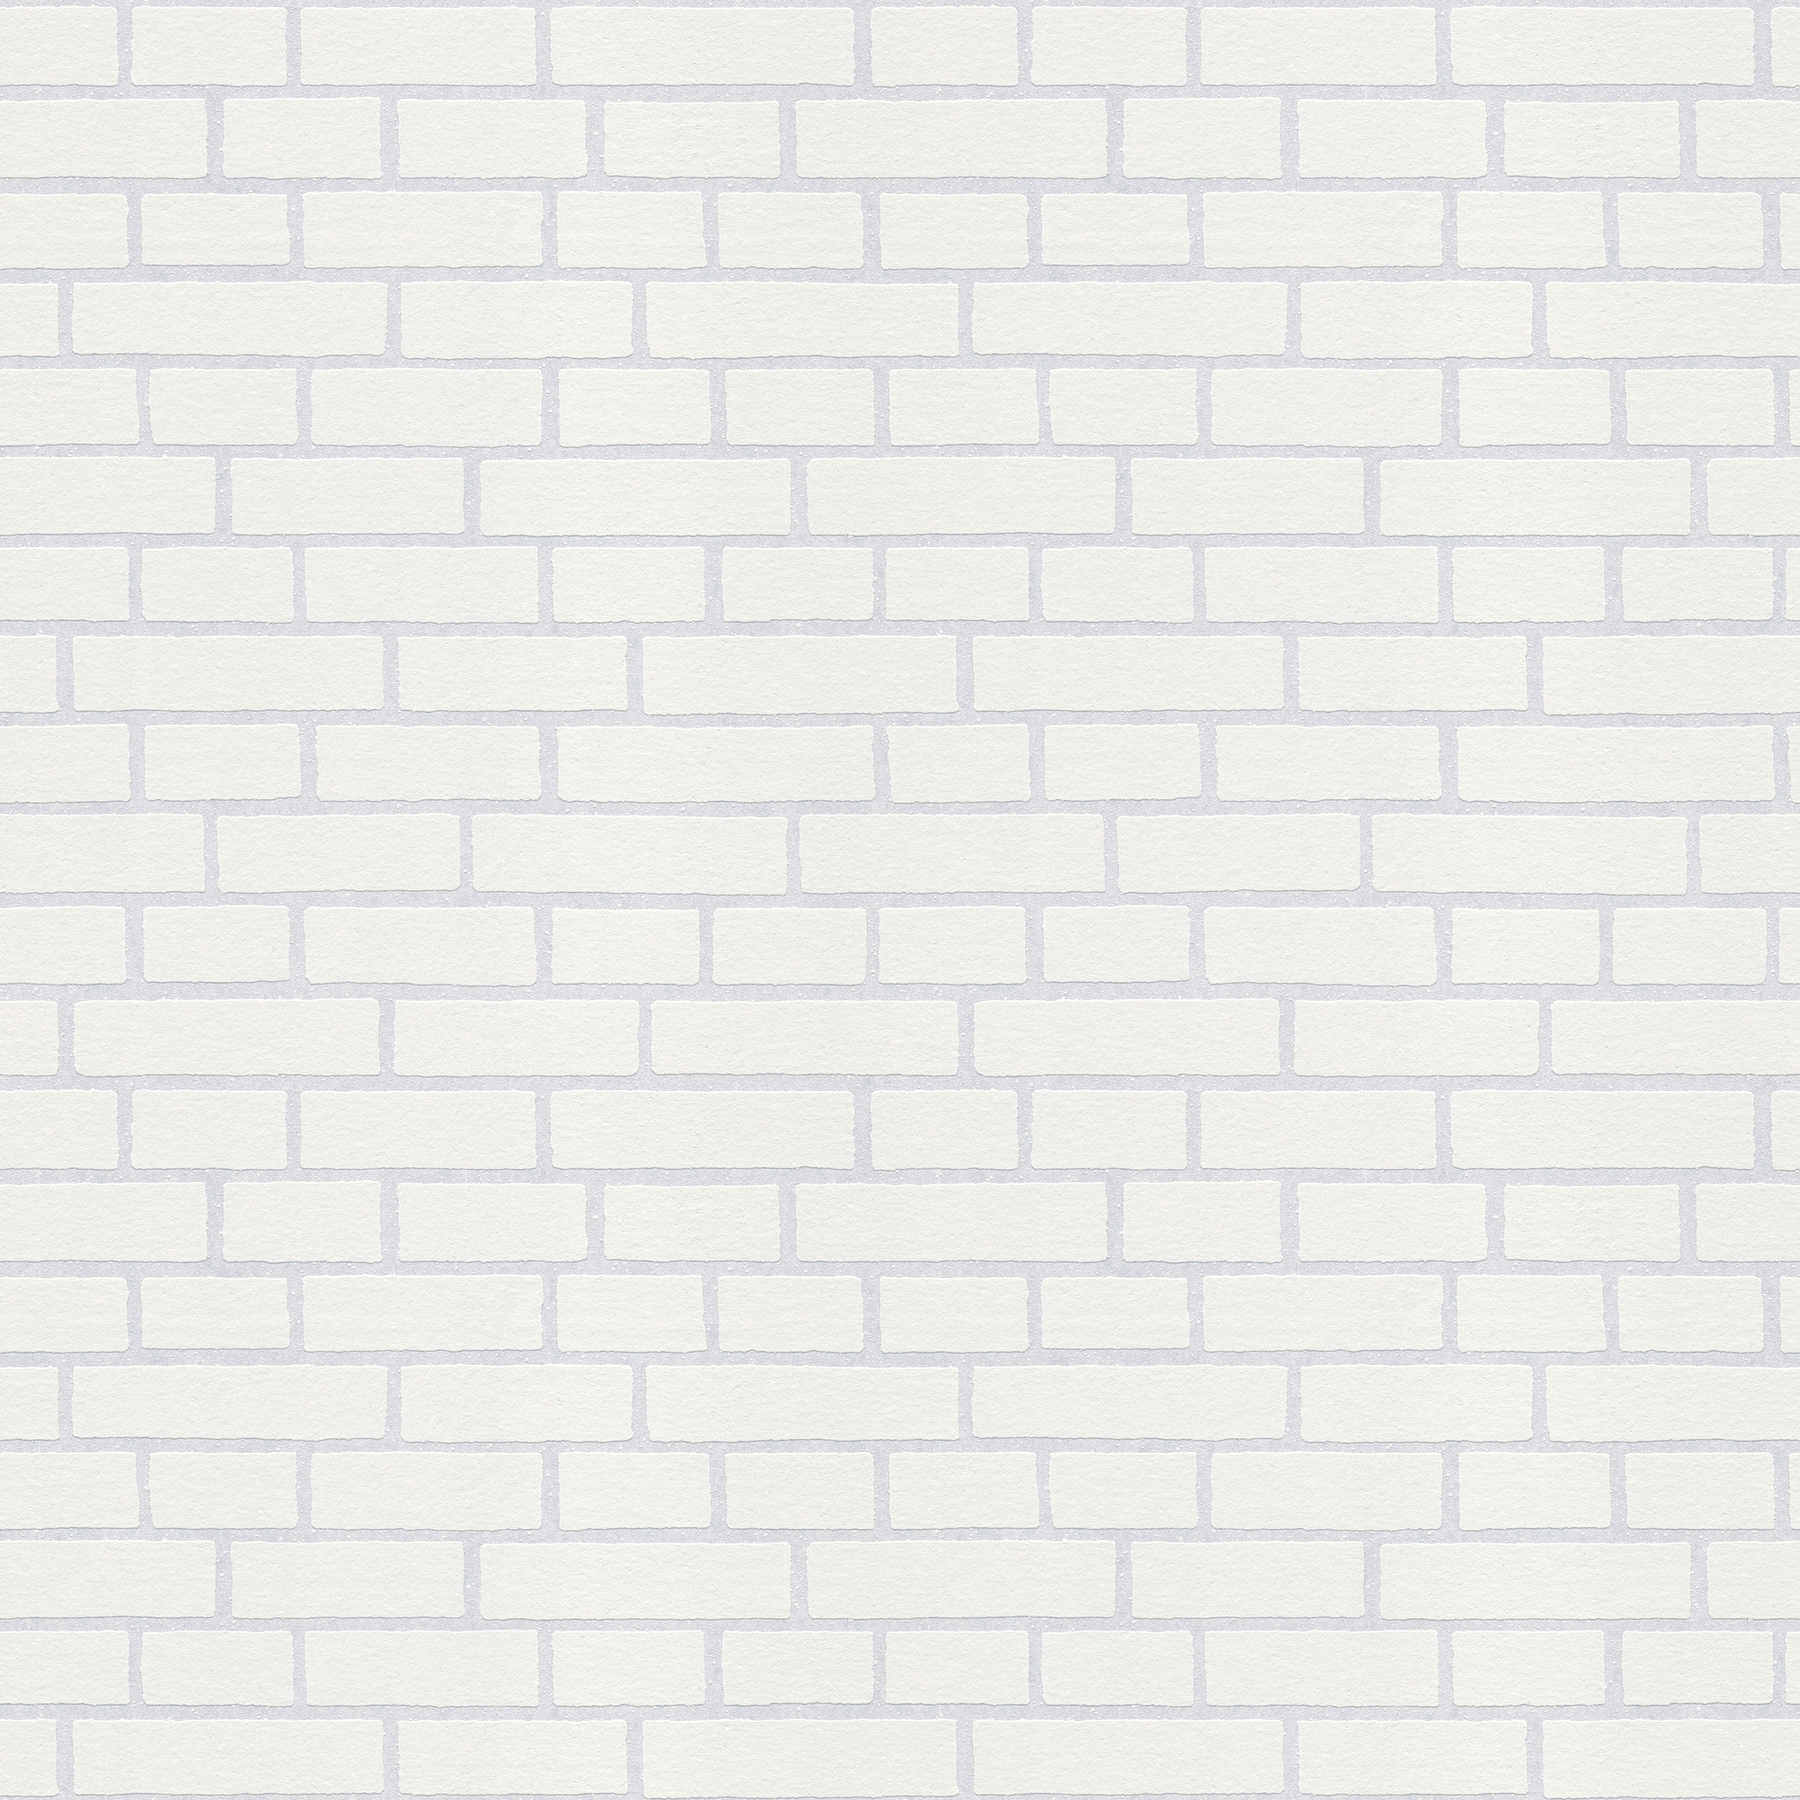 Masonry wallpaper to paint over, with 3D effect - White
